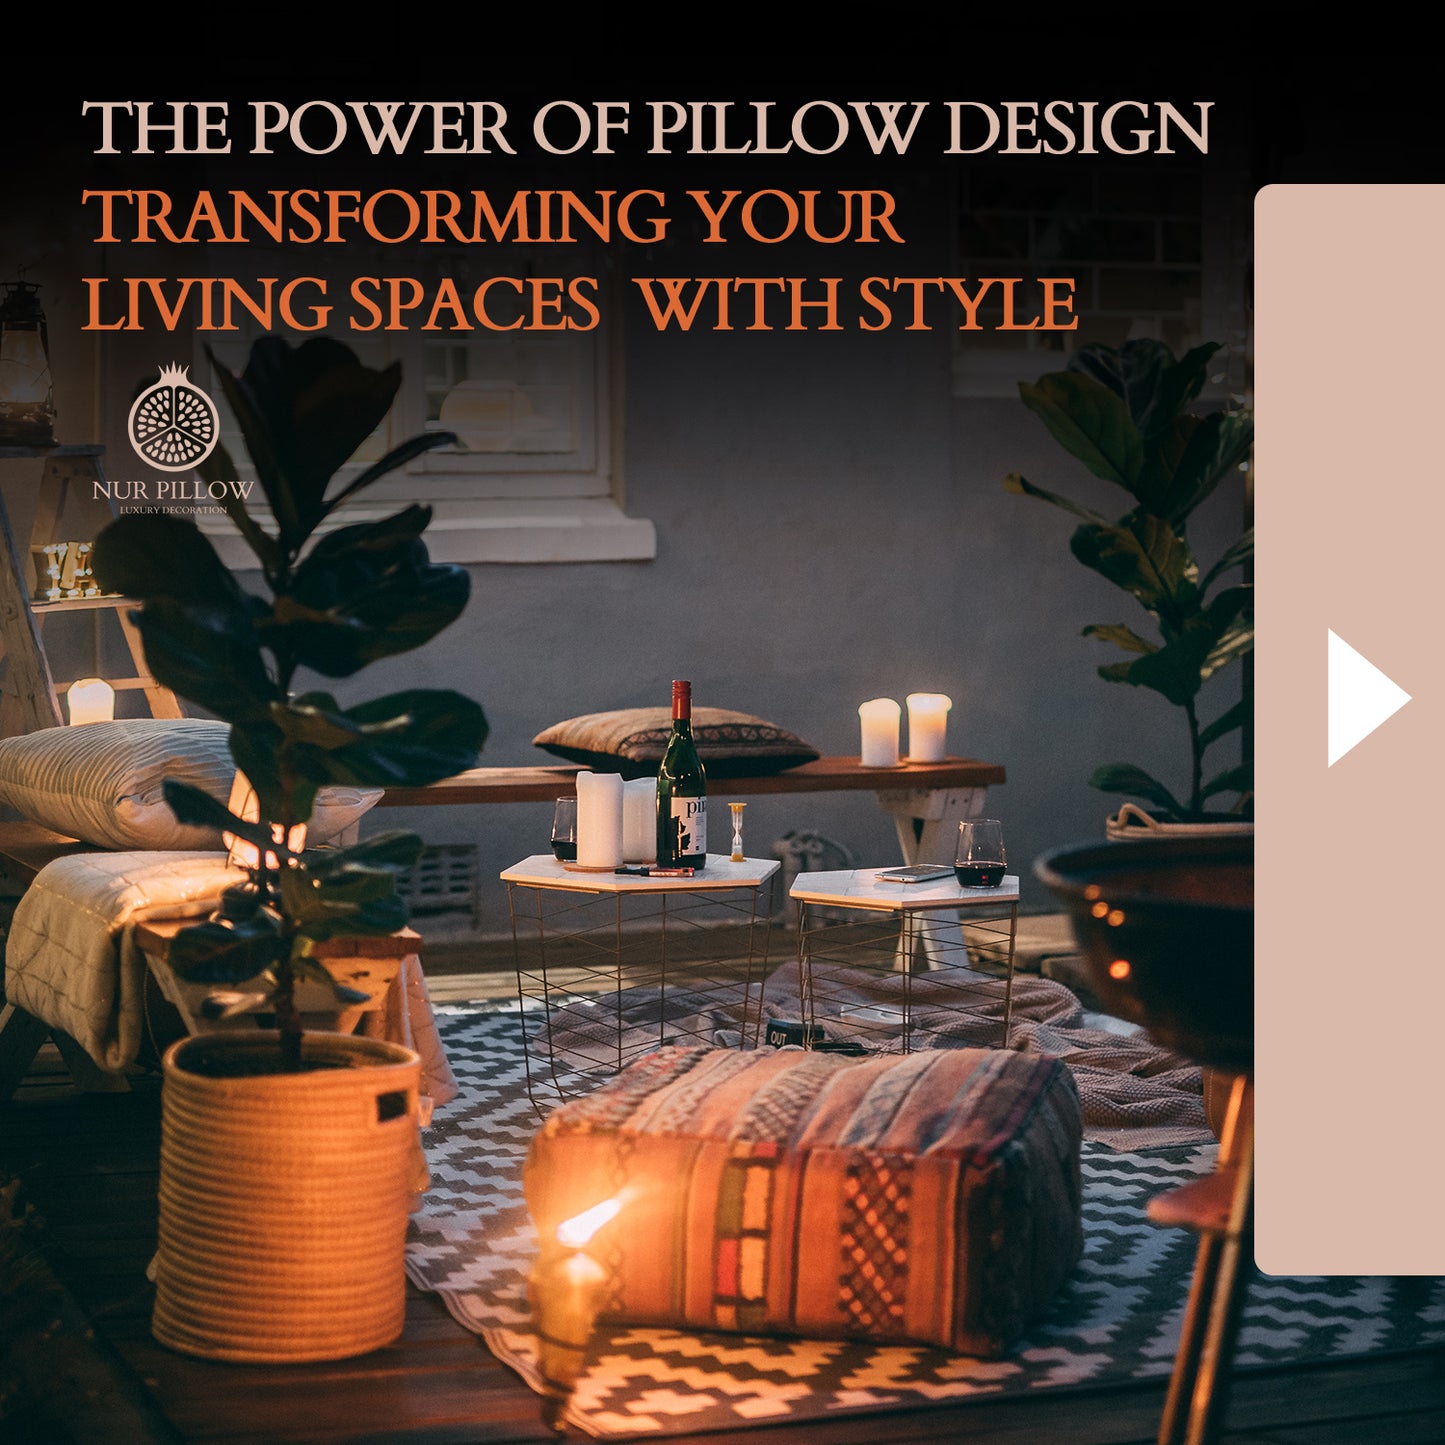 The Power of Pillow Design: Transforming Your Living Spaces with Style